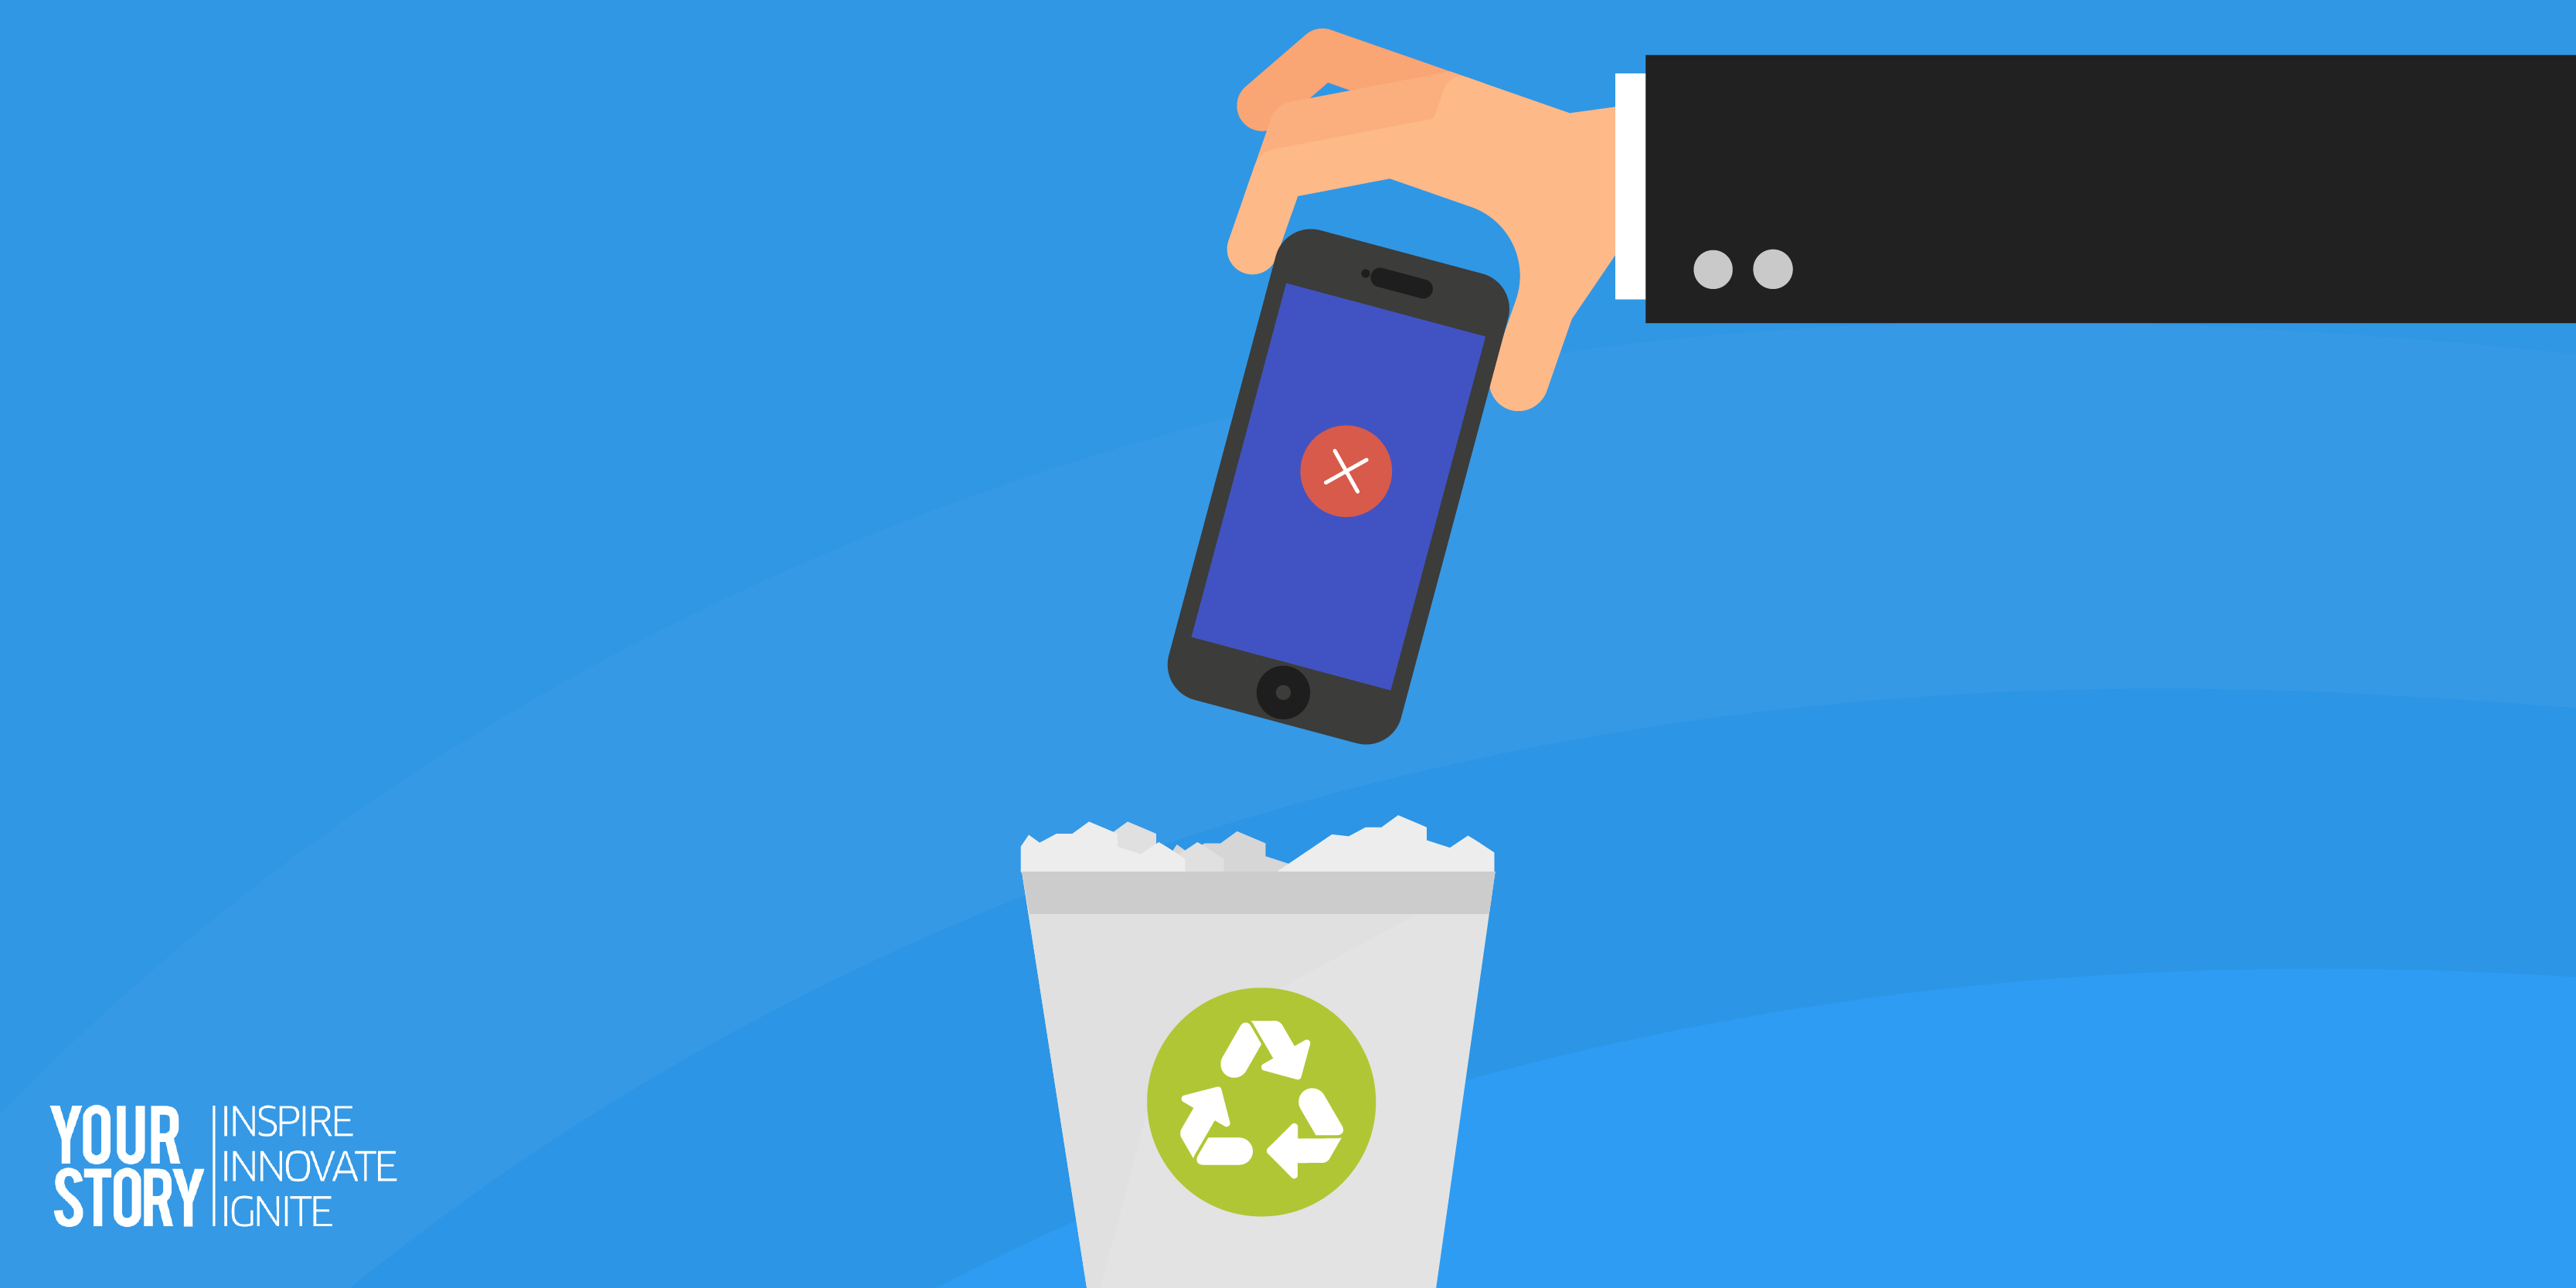 Here are 9 ways to ensure your mobile app doesn't end up in the trash in the first 3 days